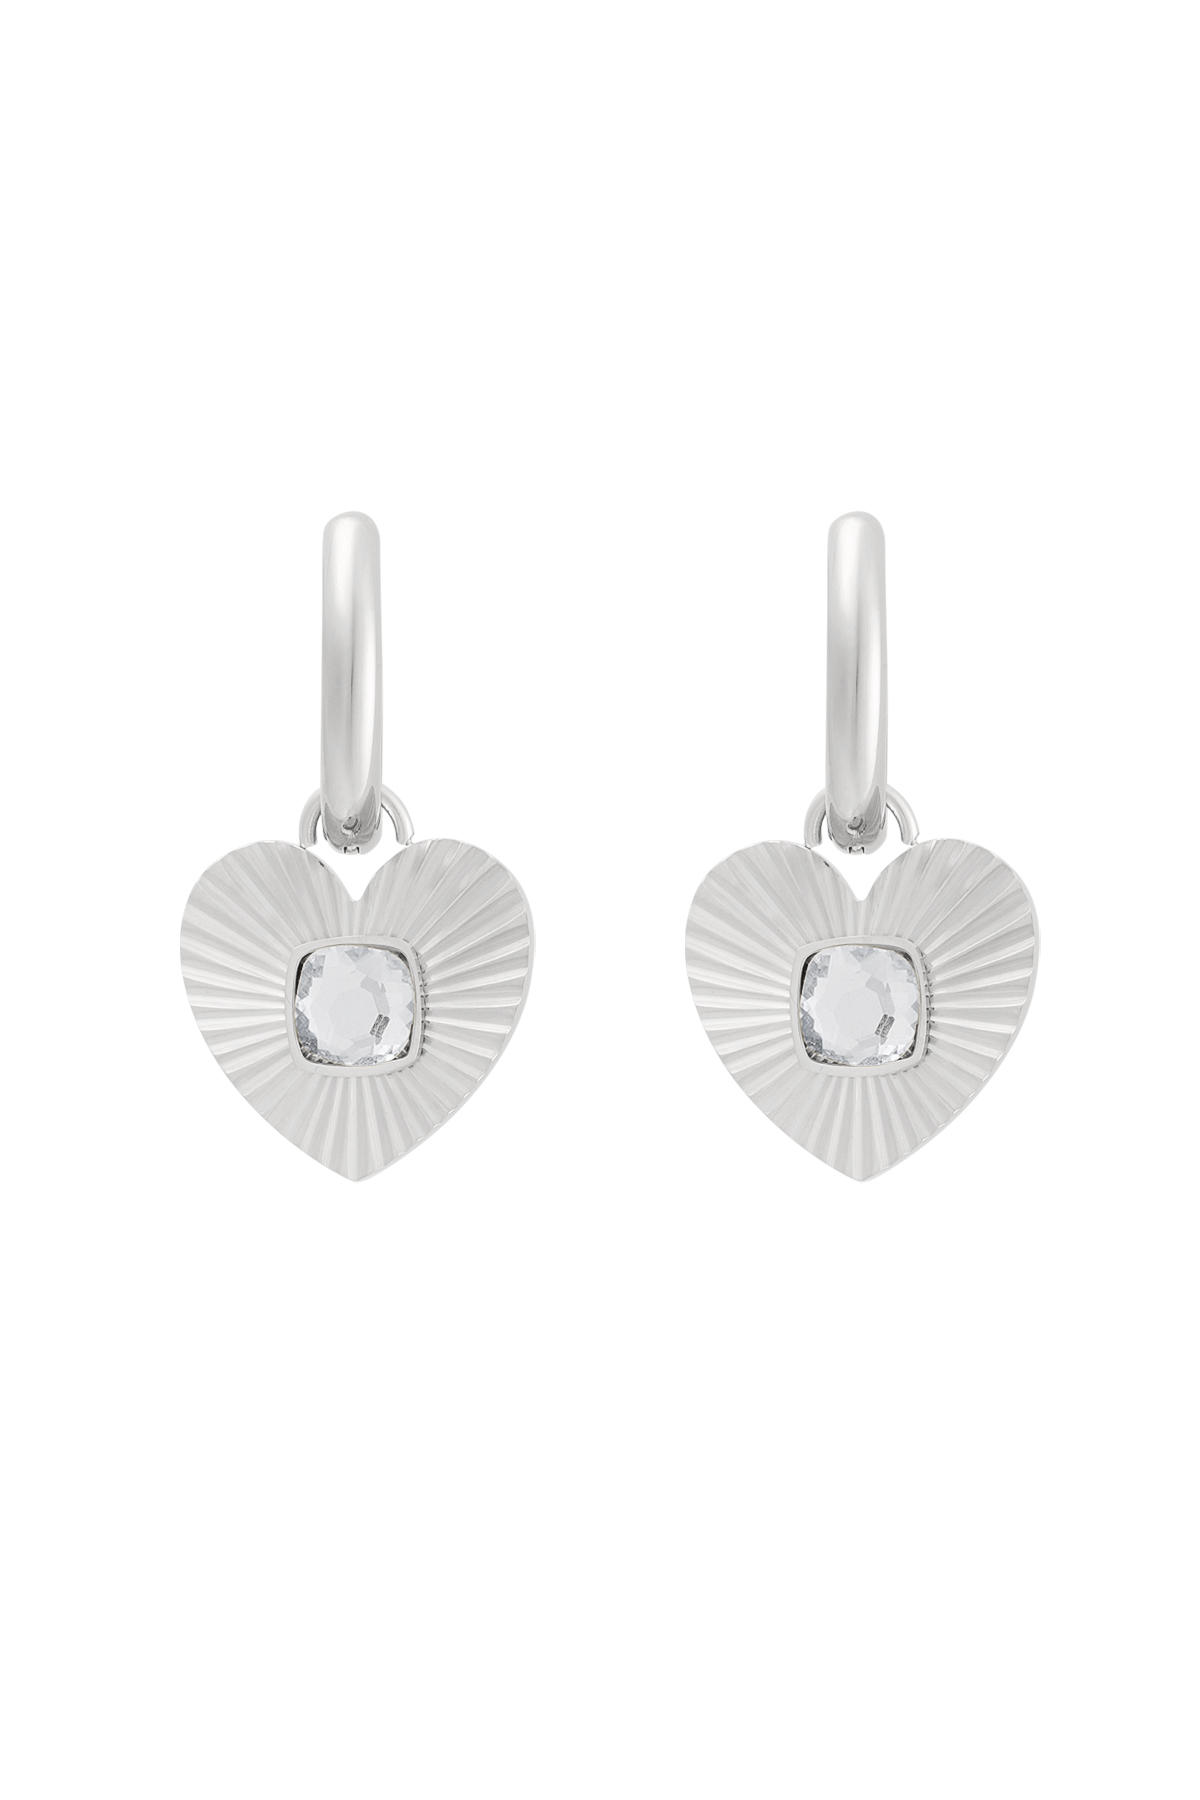 Earrings heart with stone - silver/white h5 